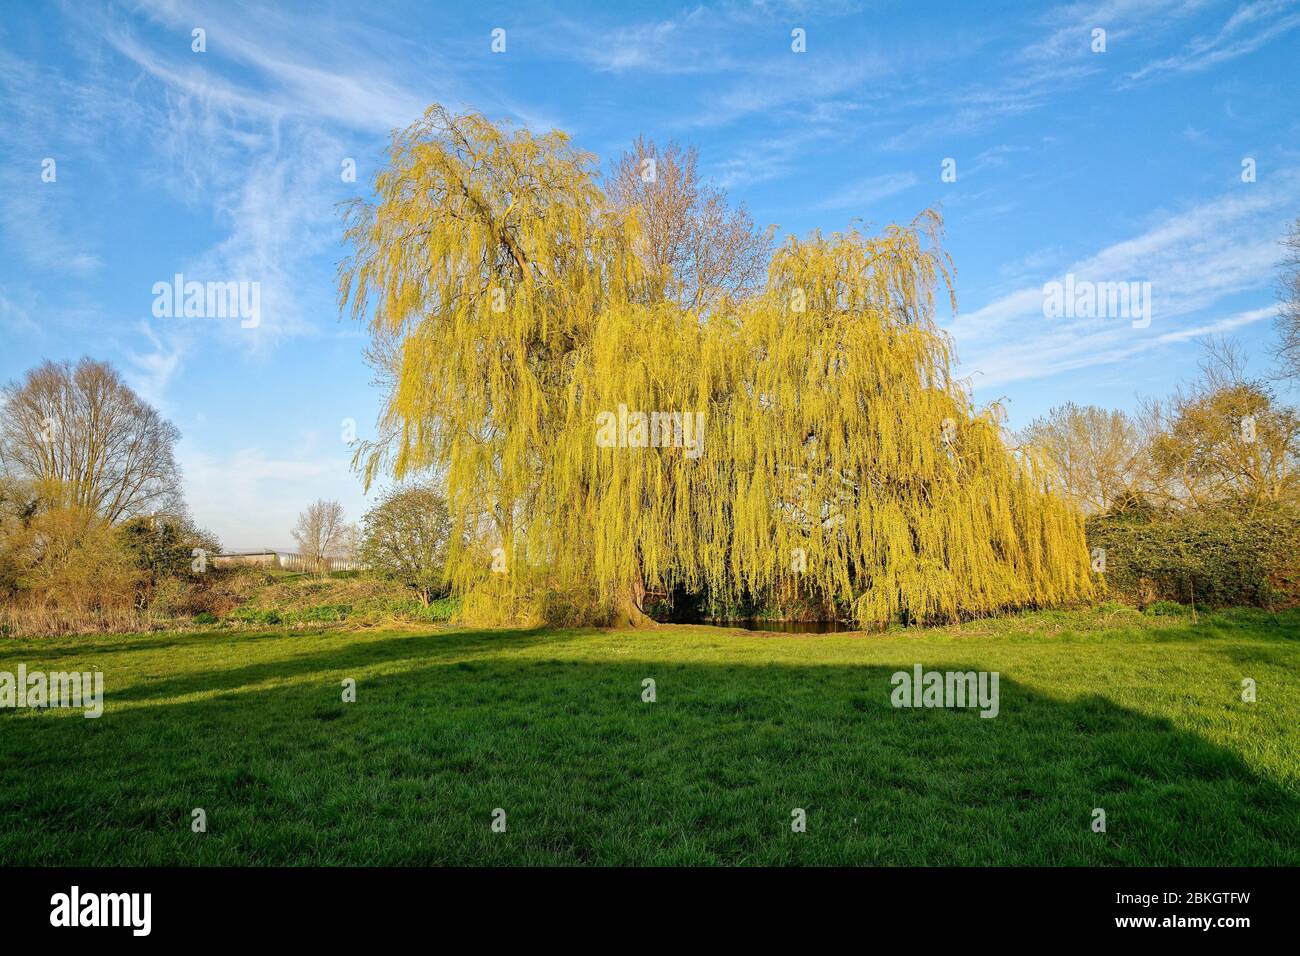 A weeping willow tree in full leaf, salix chrysocoma, illuminated by yellow  evening sunlight in the countryside in Shepperton Surrey UK Stock Photo